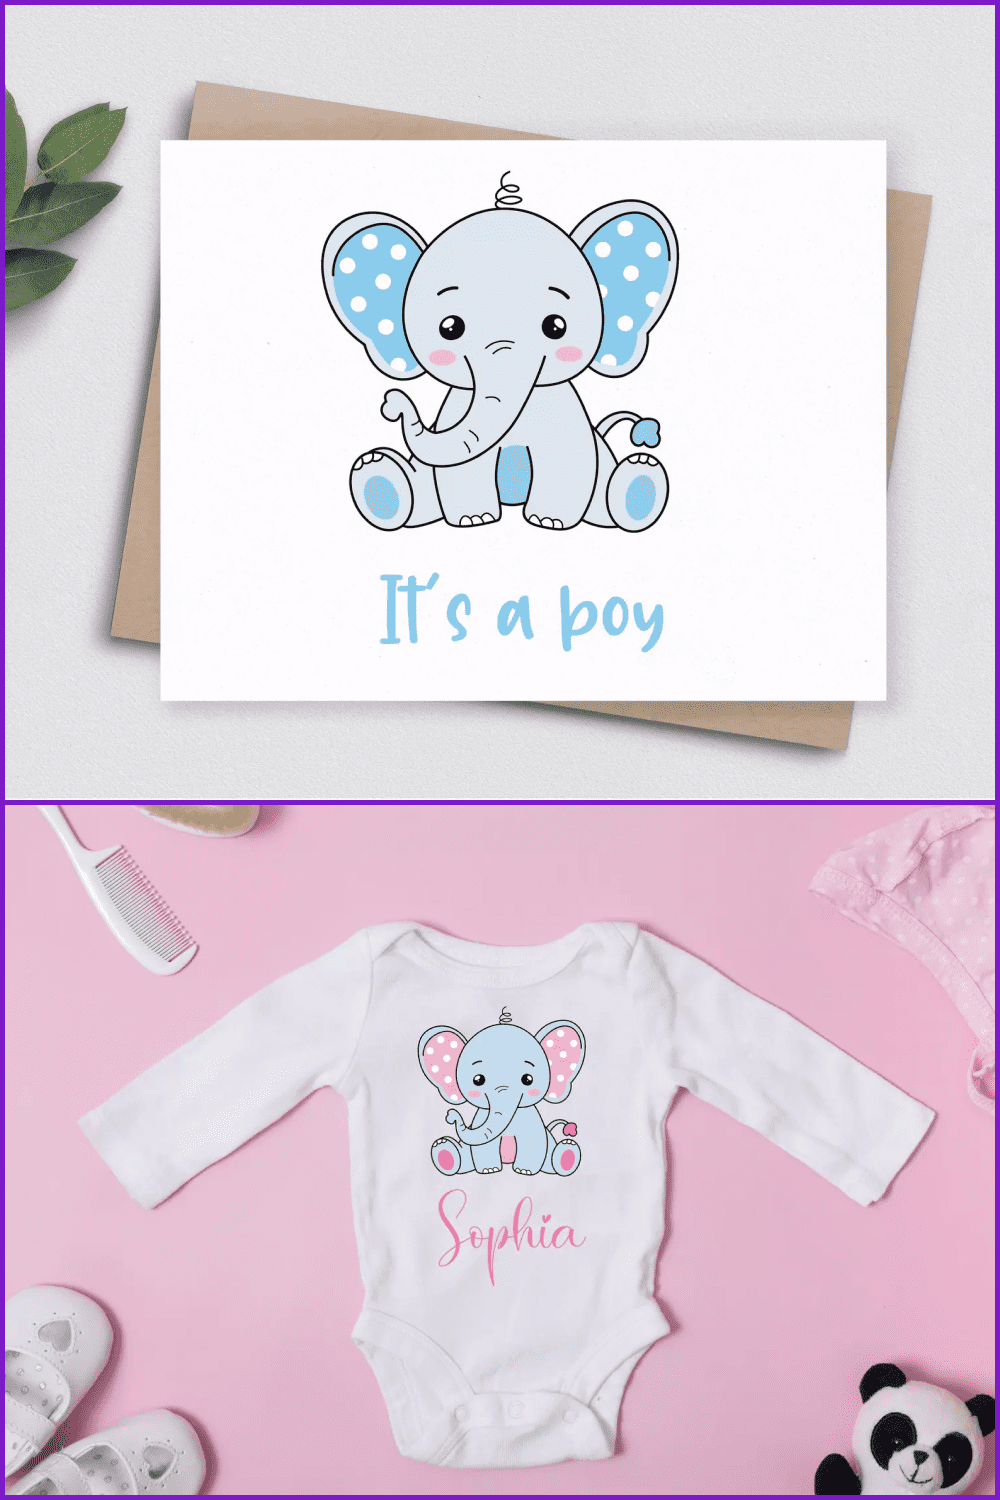 Cute little elephant on baby clothes.